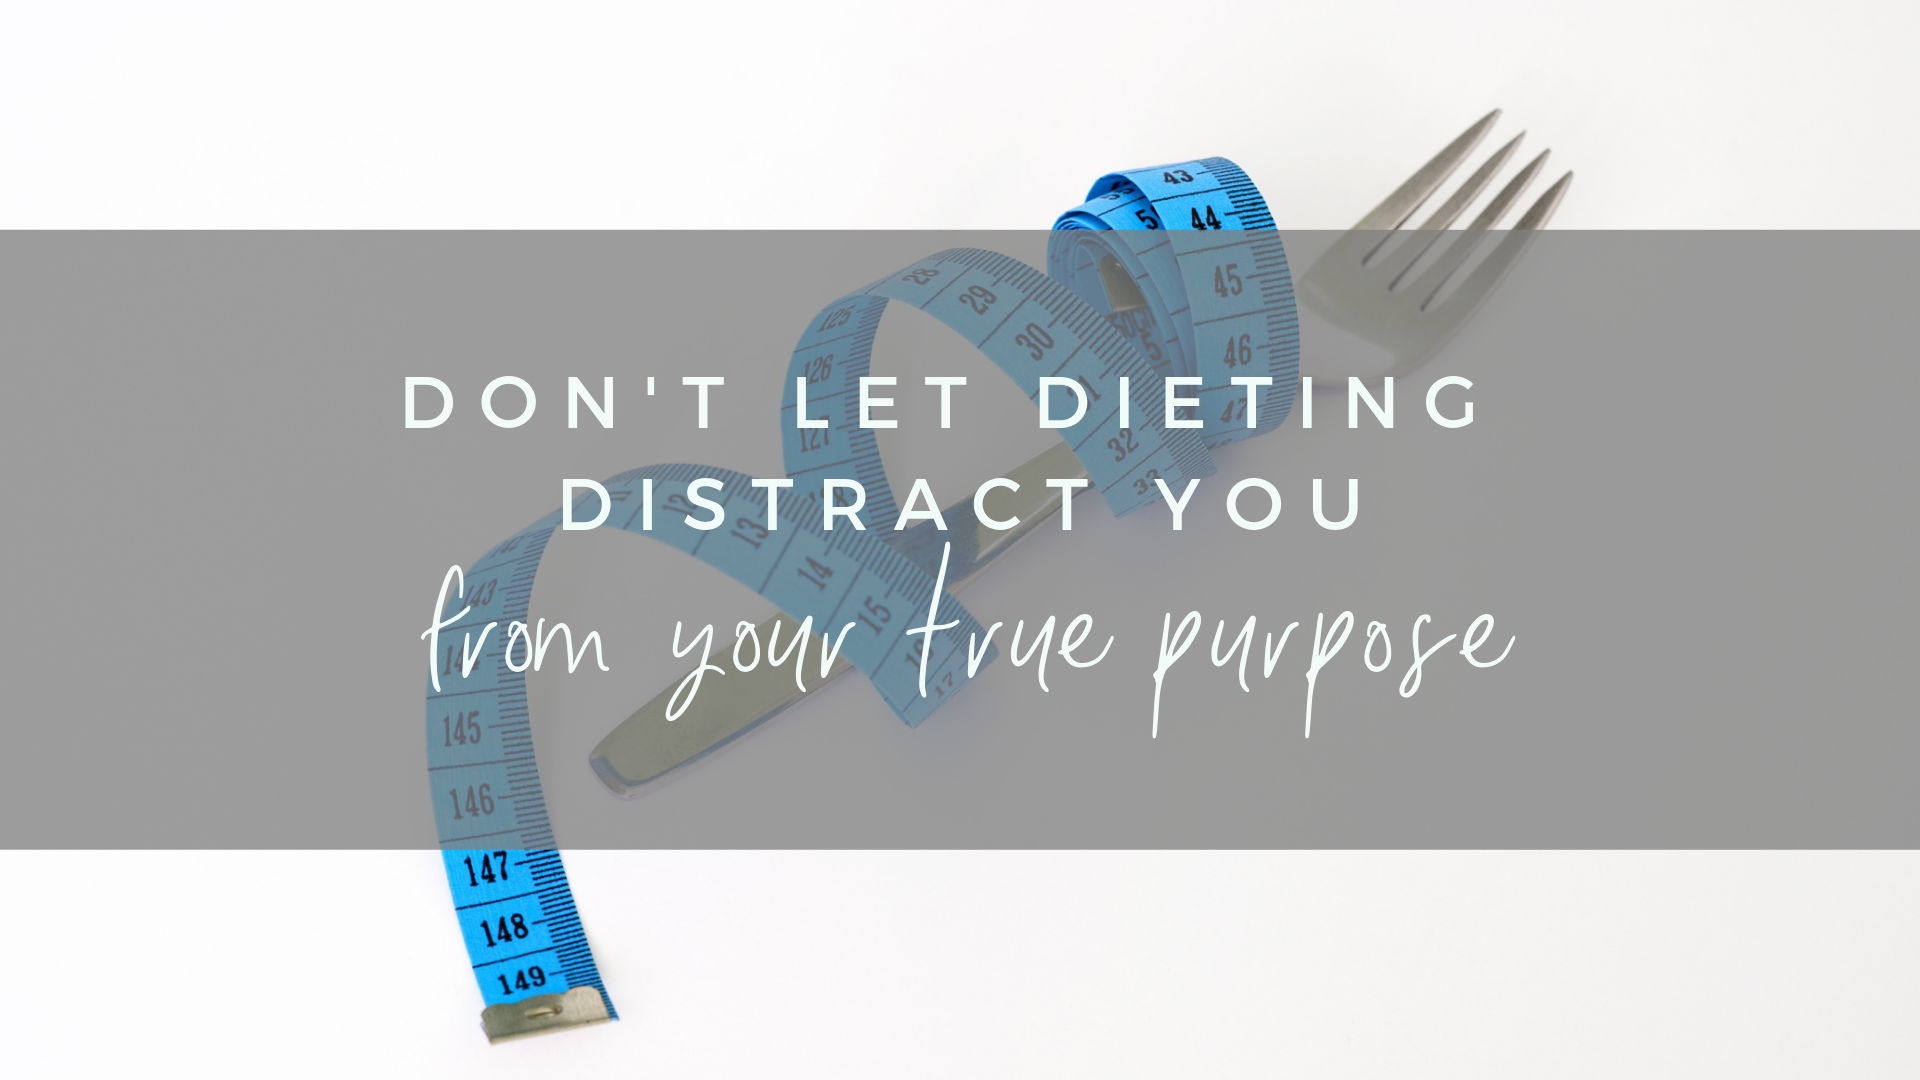 Don't let dieting distract you from your true purpose. 